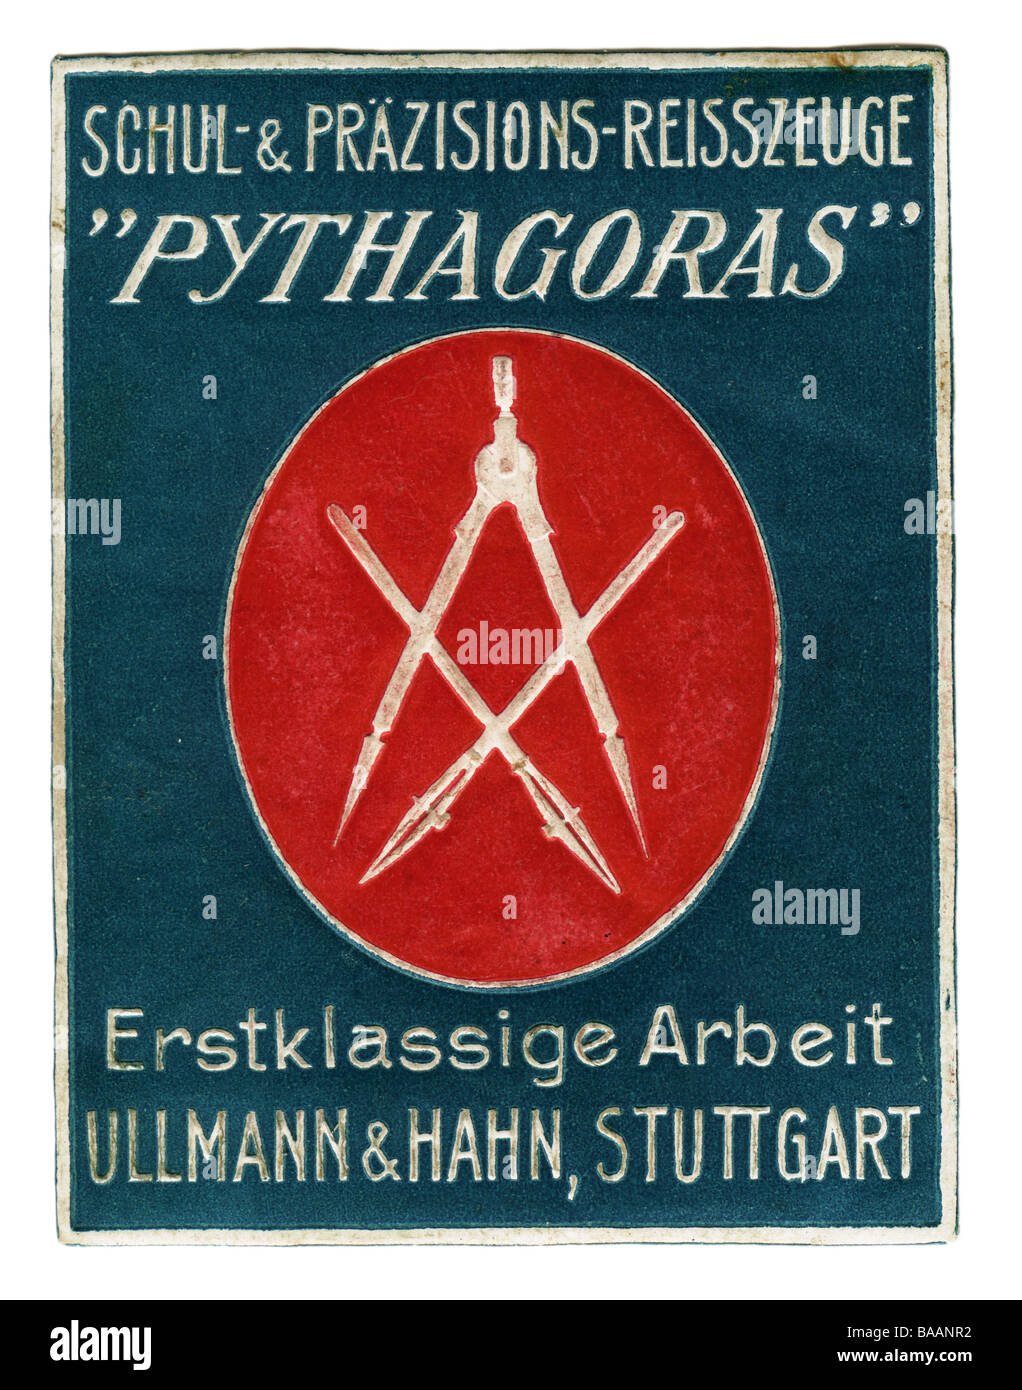 advertising, stamps, Pythagoras, school and precision drawing instruments, Ullmann & Hahn, Stuttgart, Germany, circa 1910, Stock Photo